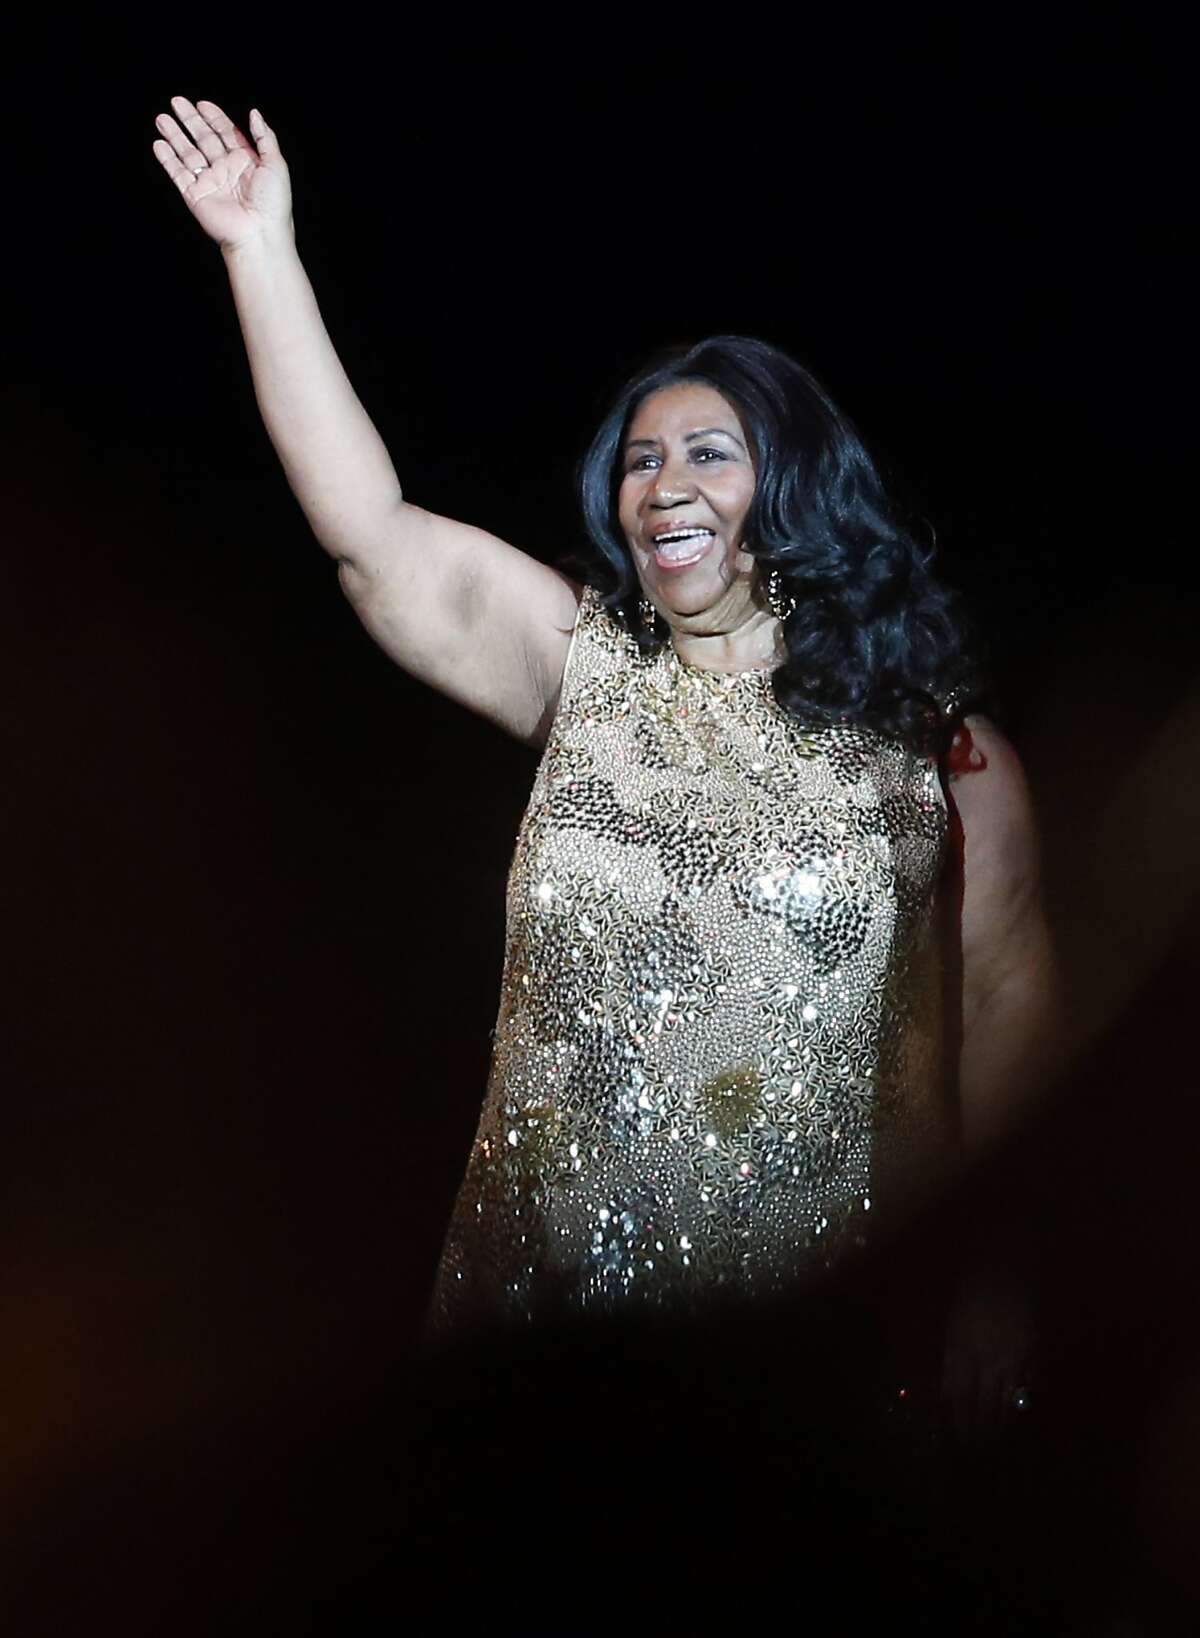 Aretha Franklin acknowledges the crowd as she takes to the stage to perform at Oracle Arena in Oakland, Calif., on Monday, Aug. 10, 2015.